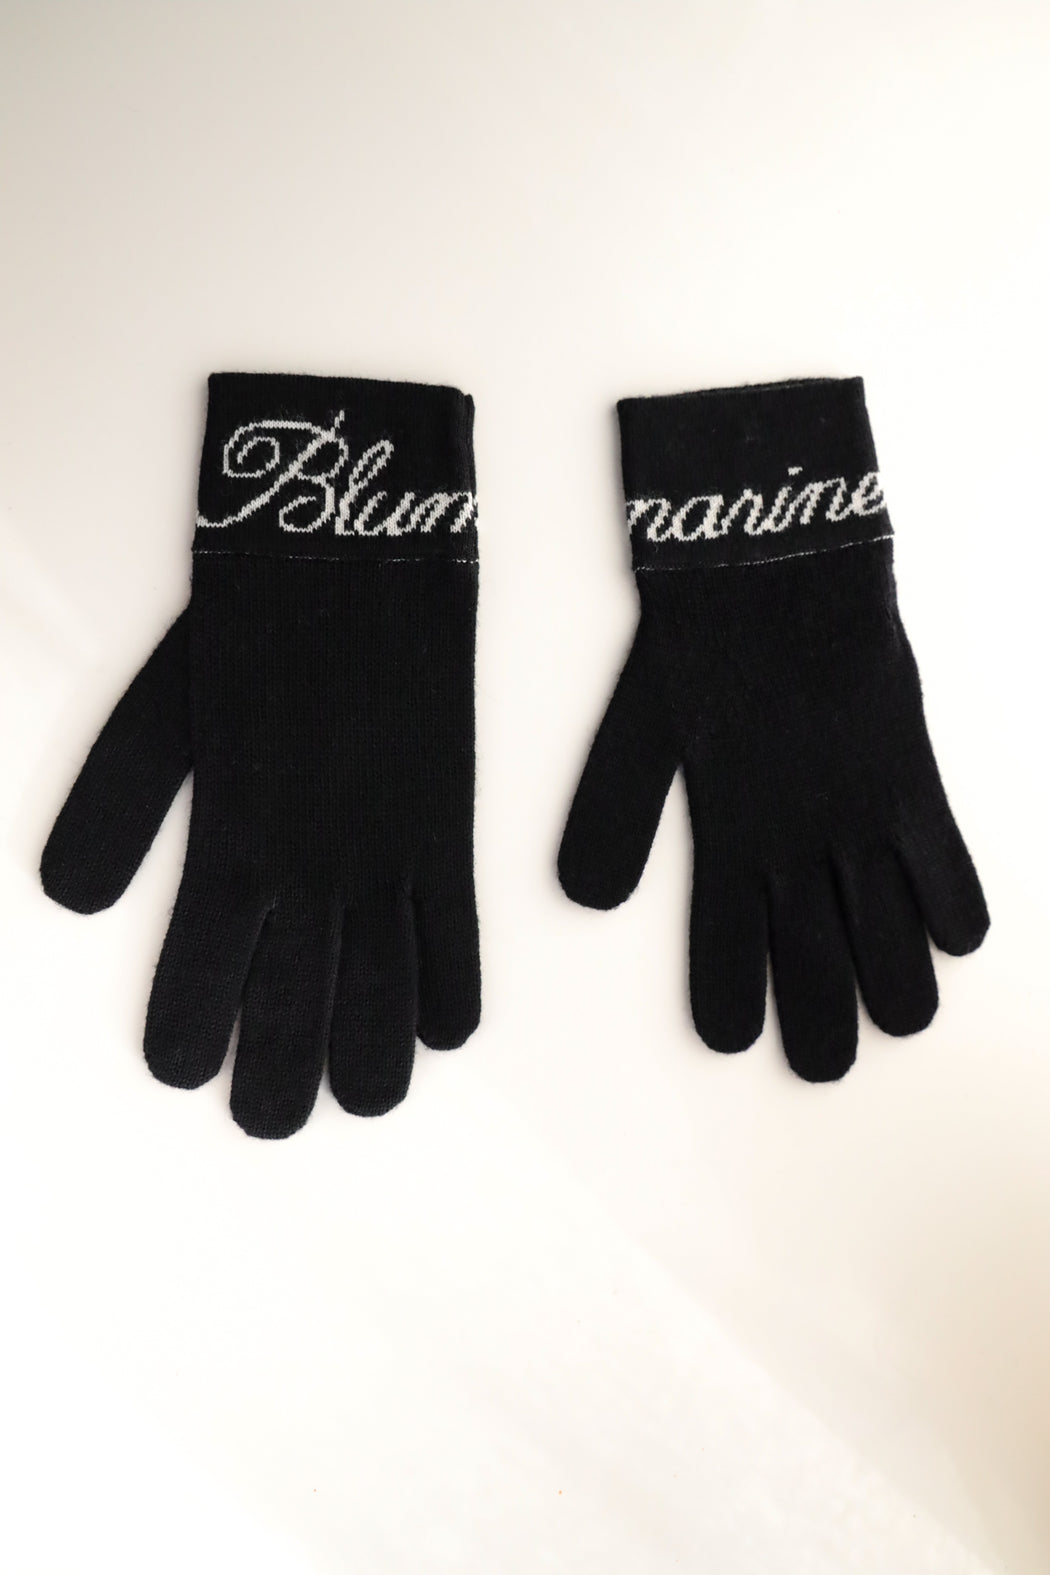 Italian Wool Cashmere Gloves in Black and White